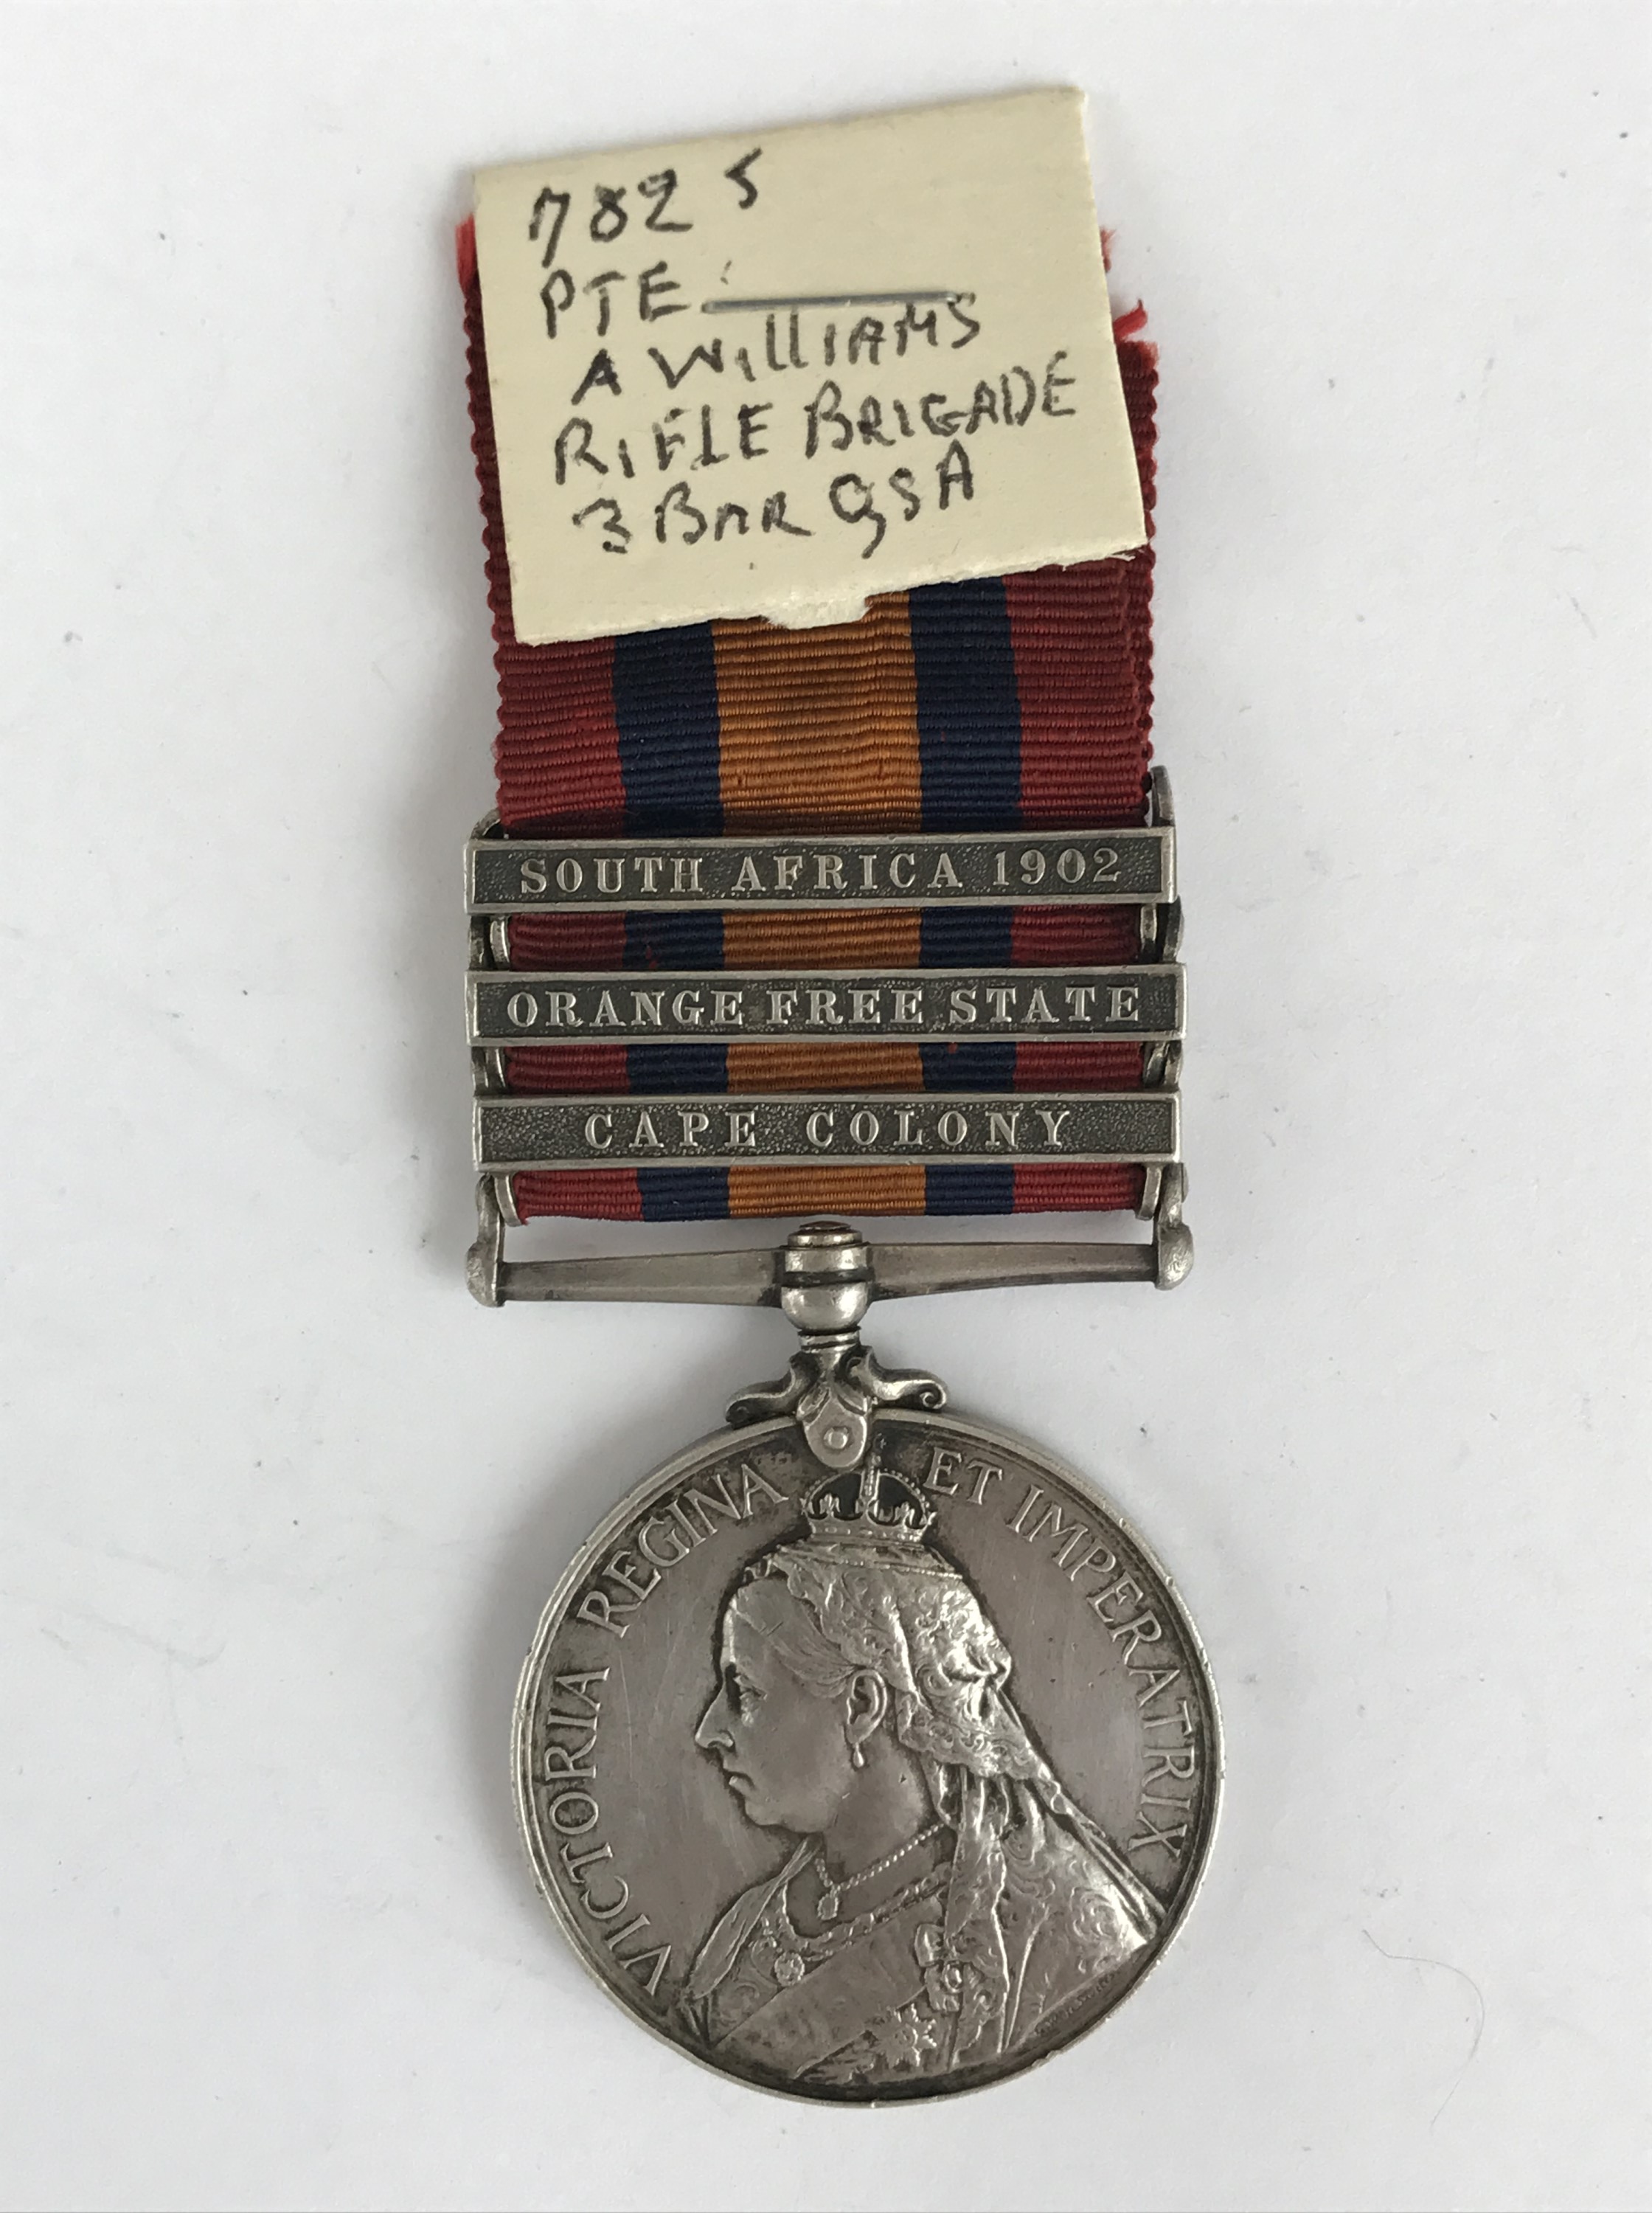 A Queen's South Africa medal to 7825 Pte A Williams, Rifle Brigade